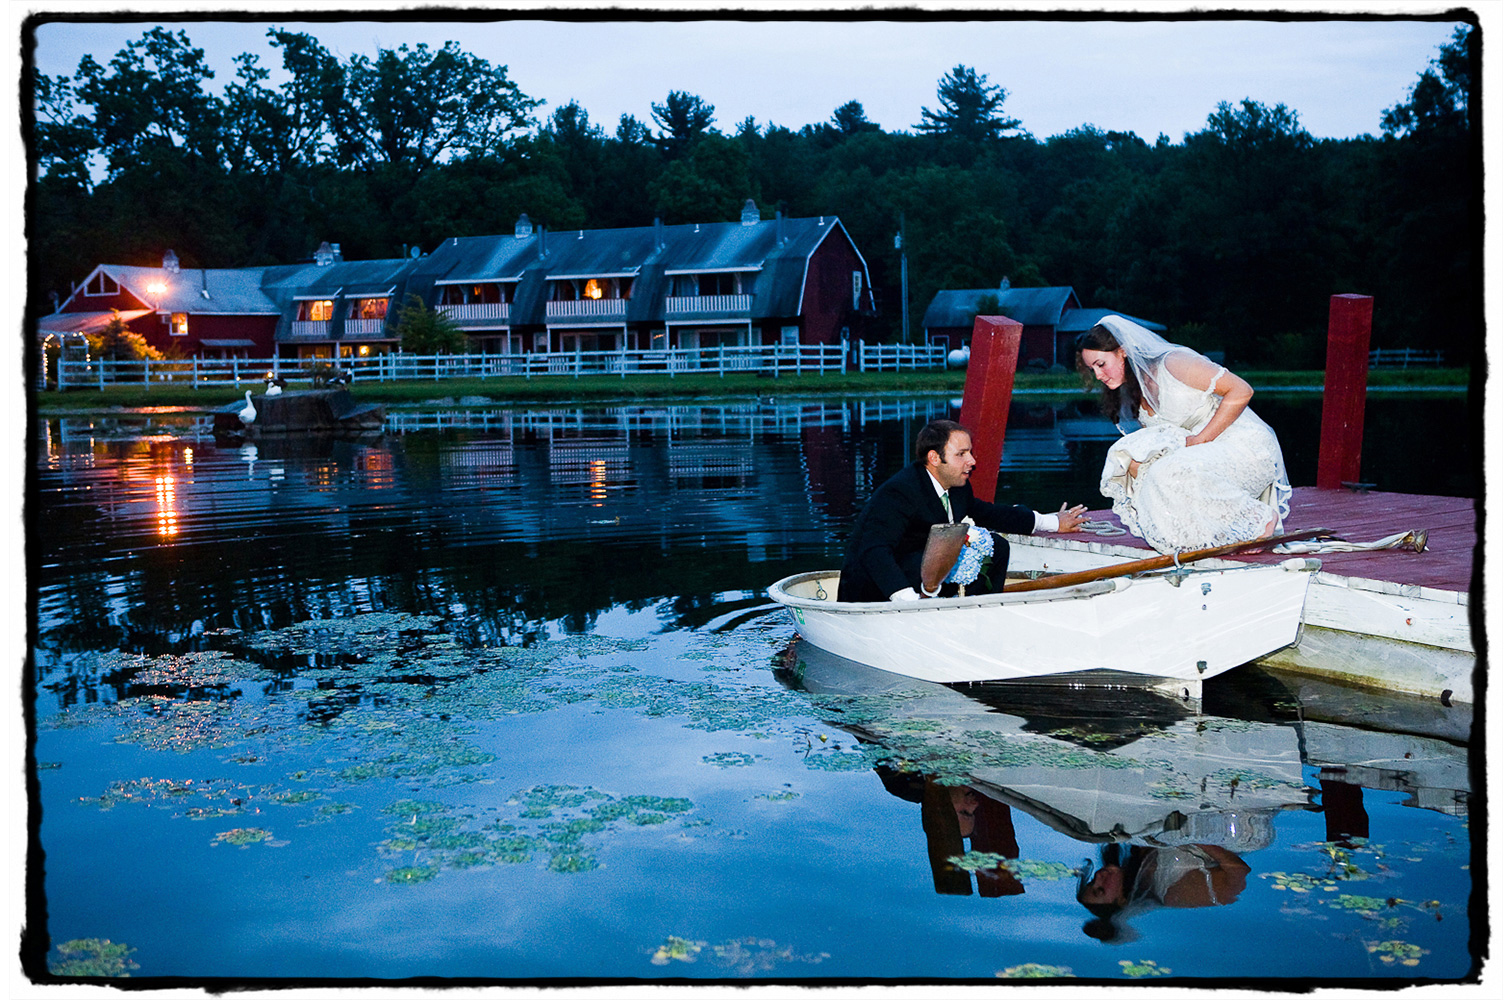 Alicia and Brian were living aboard their sailboat, Sarabande, in New Jersey leading up to the wedding.  Their plan?  To sail around the world after tying the knot.  They brought their ship's dingy to row across the pond at The Kaaterskill between the ceremony and reception!  They have been sailing abroad ever since!